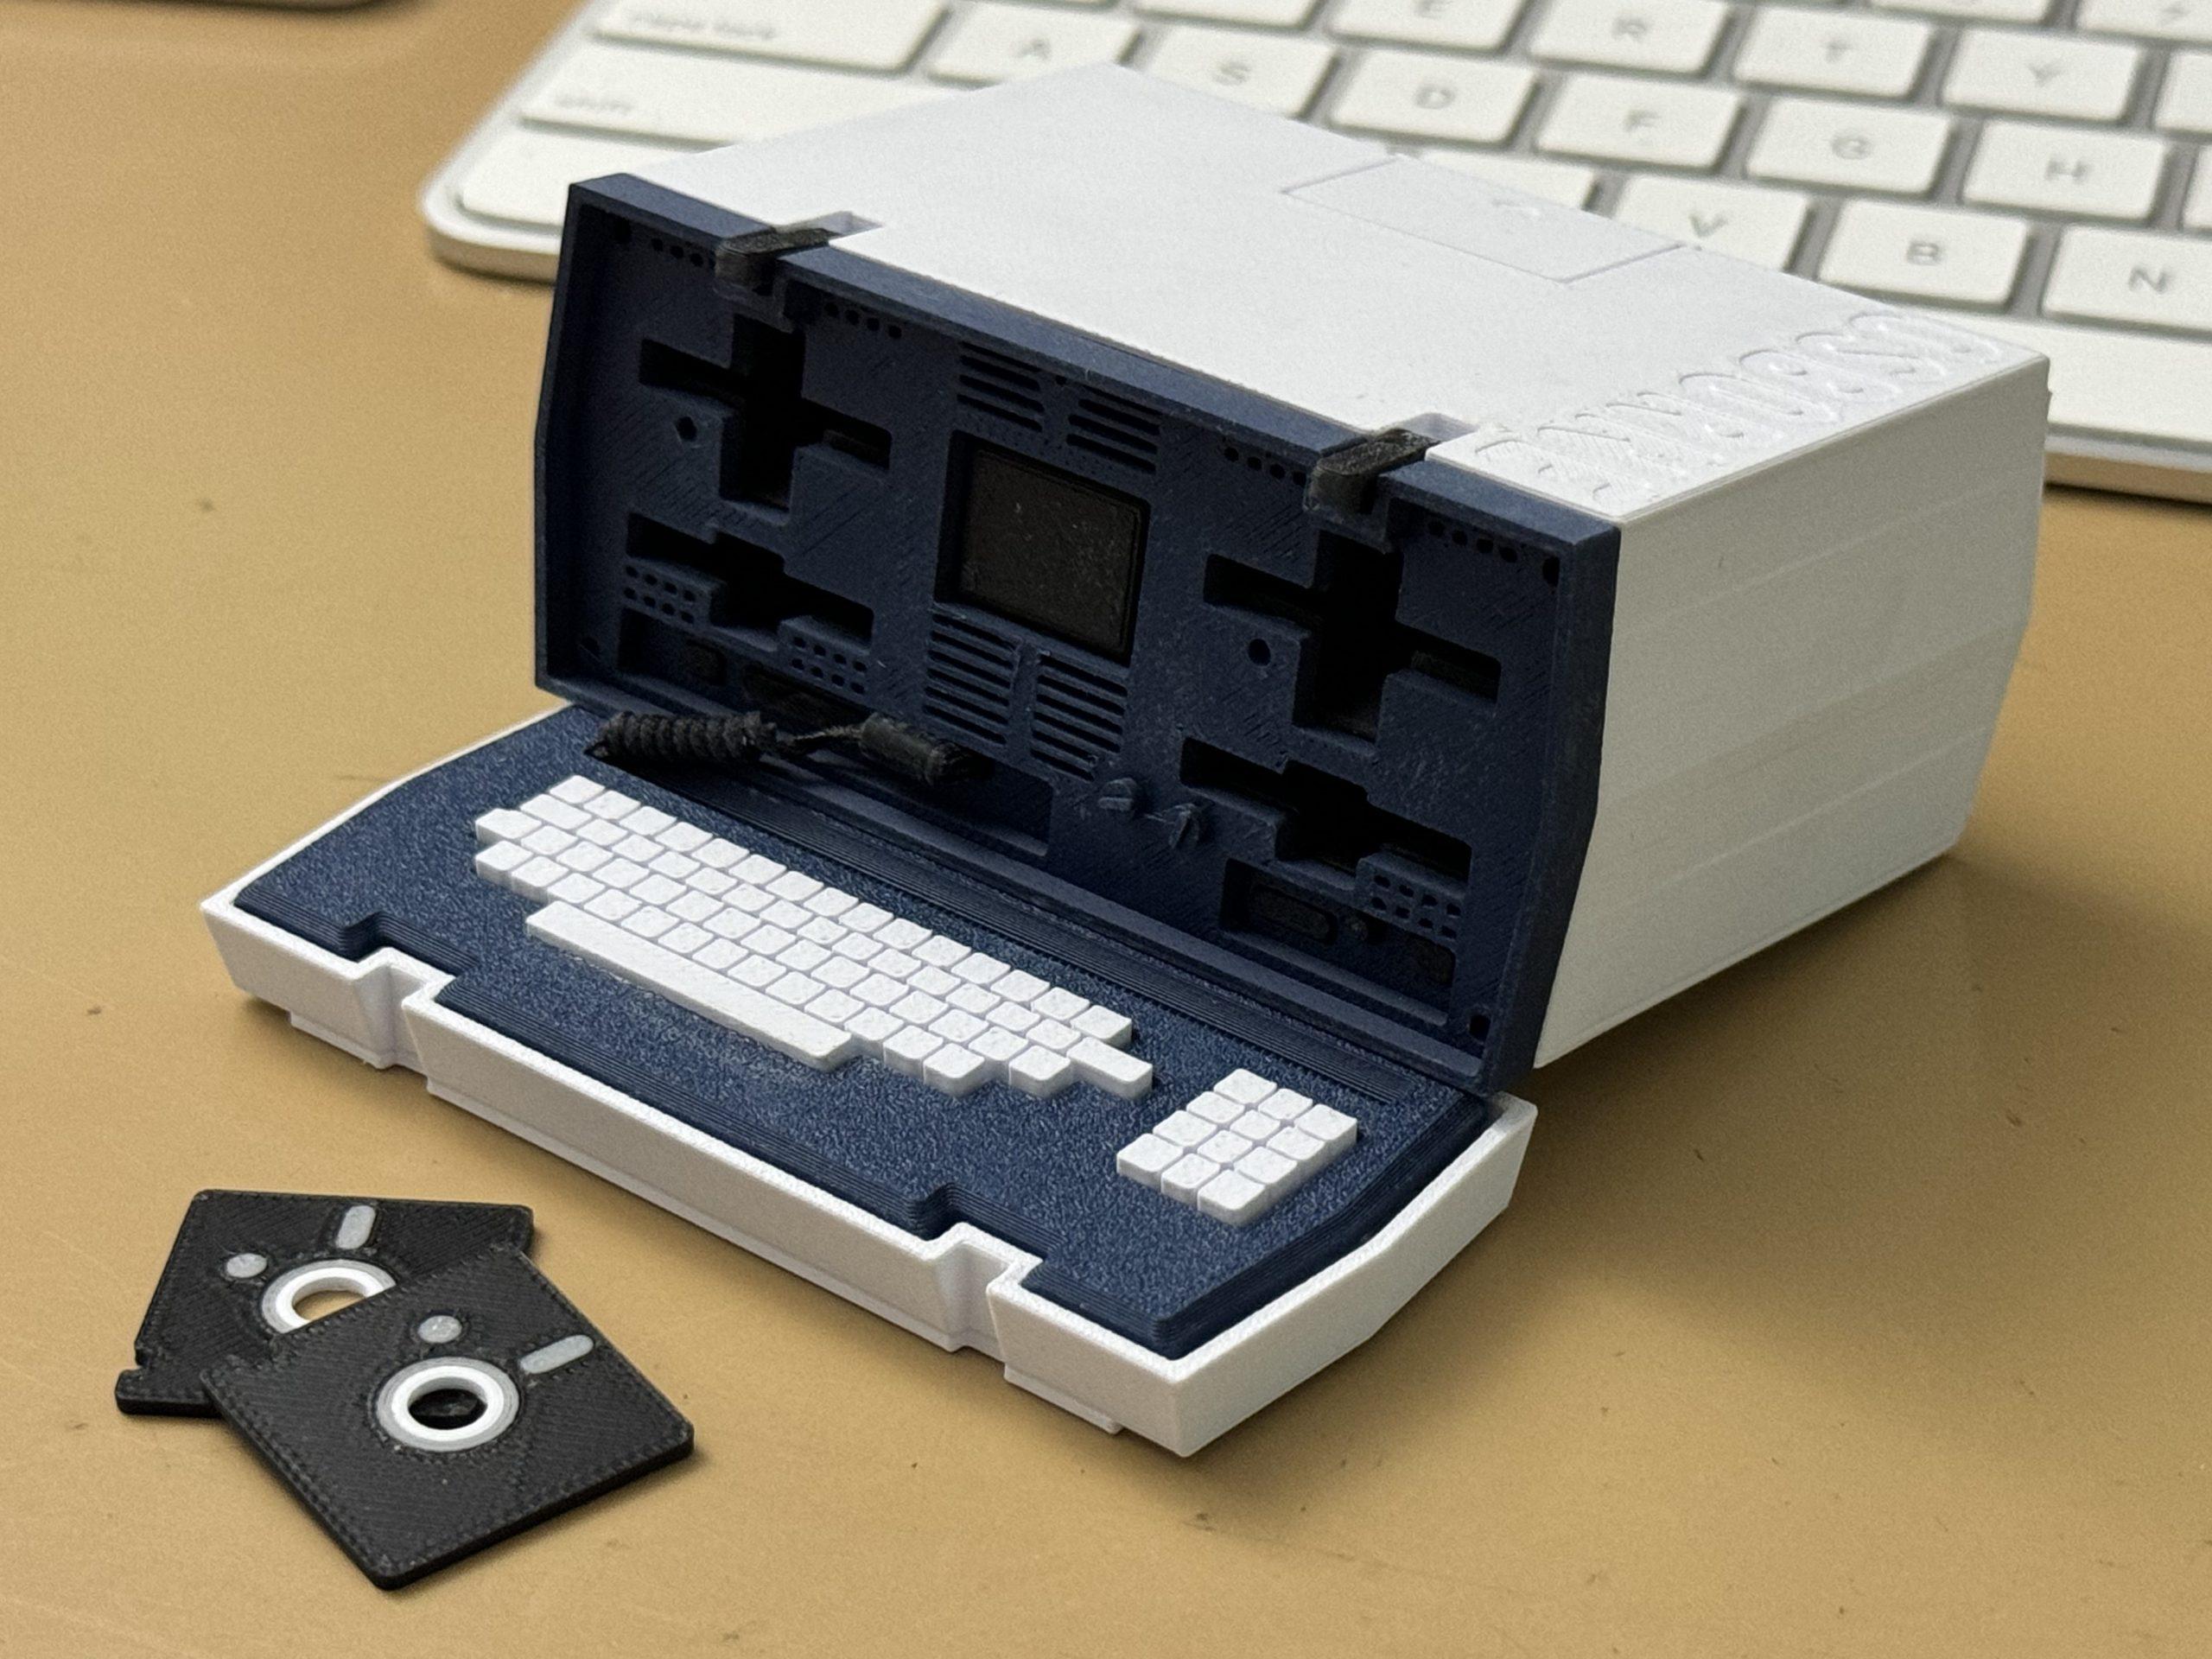 A small 3D printed Osborne 1 and two tiny floppy disks sitting on my desk in front of a modern Apple keyboard.